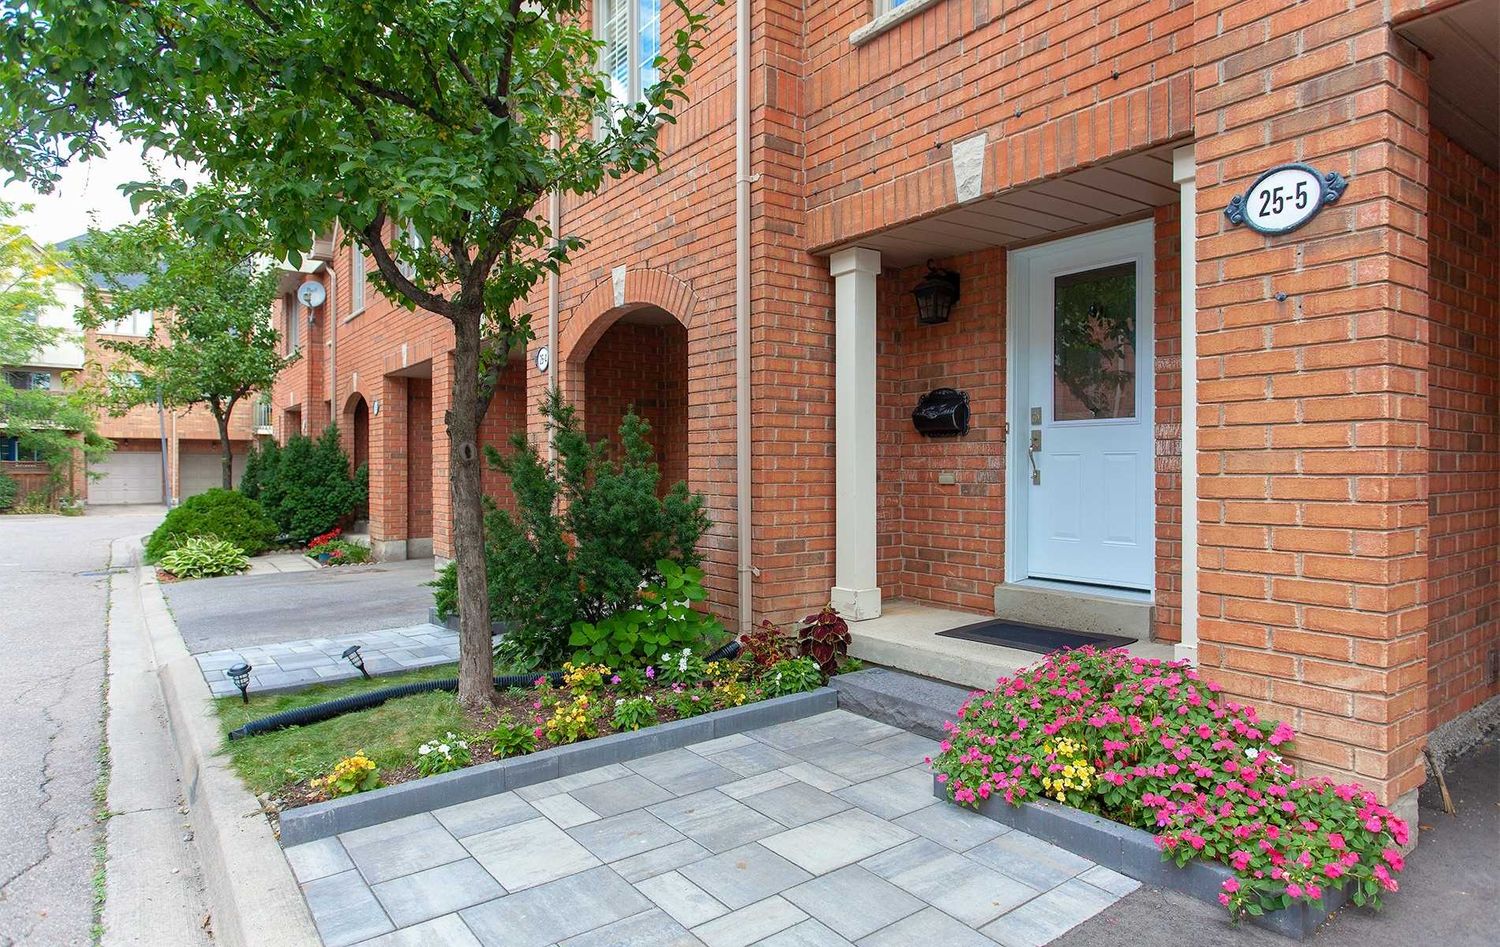 17-27 West Deane Park Drive. West Dean Park Townhomes is located in  Etobicoke, Toronto - image #2 of 2